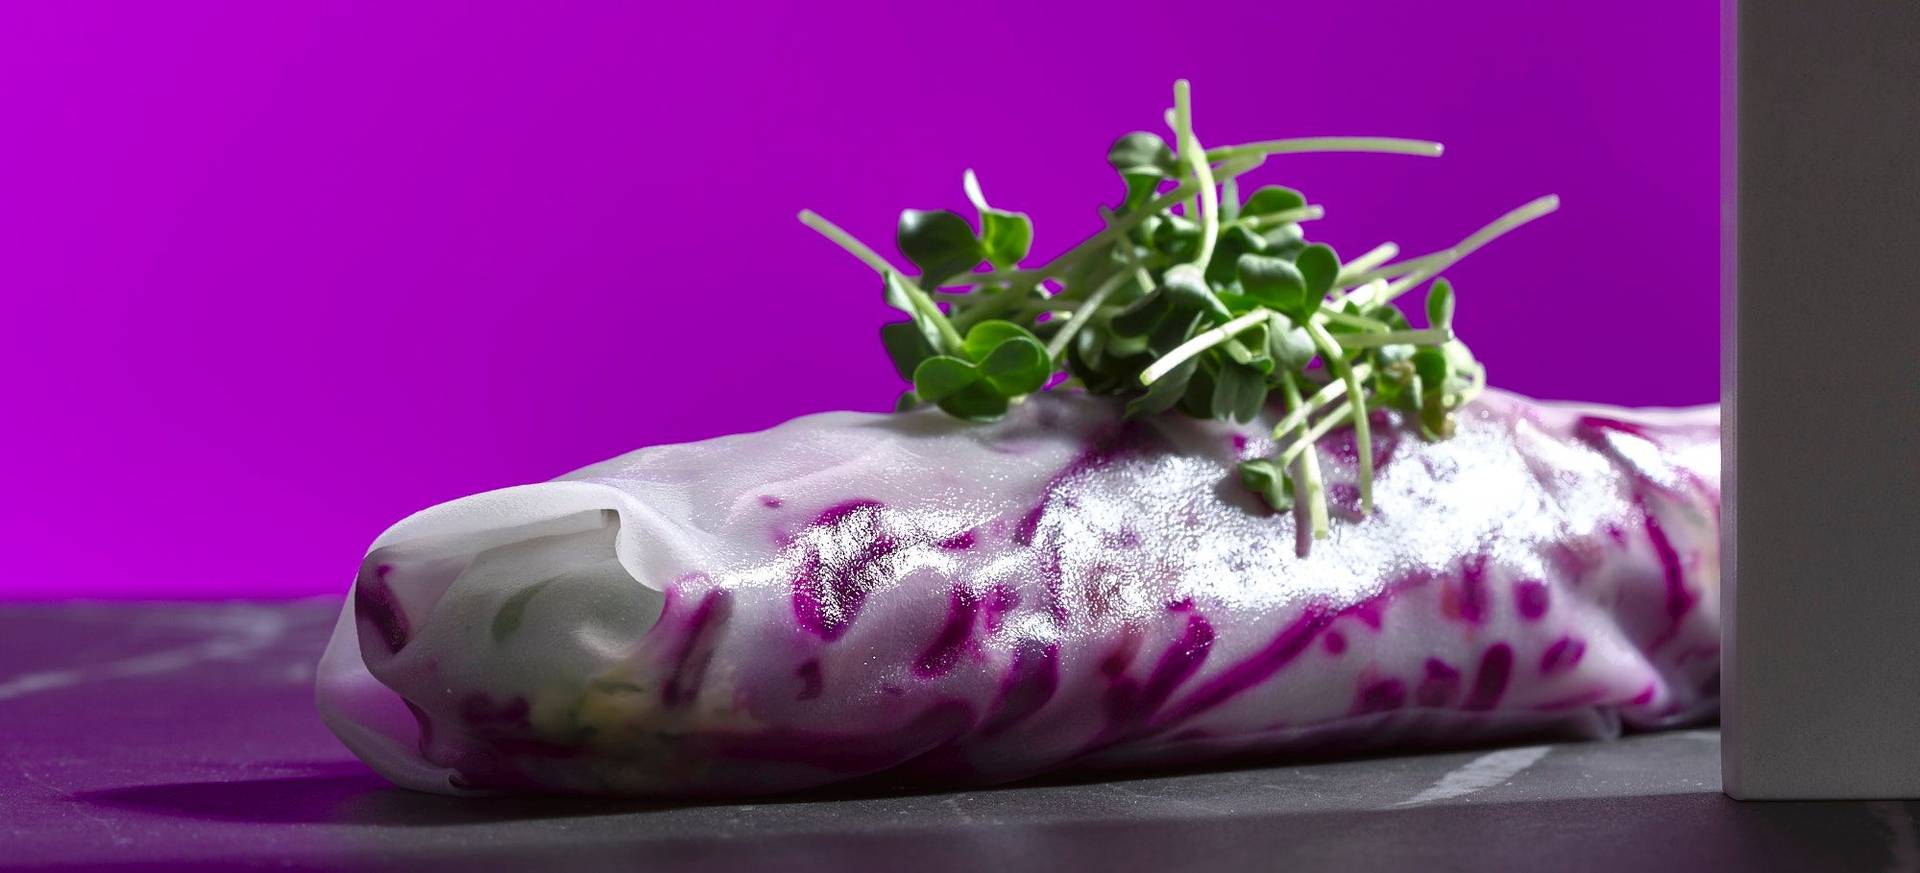 Christmas Summer Rolls with Red Cabbage–Tangerine Salad & Chicken Liver